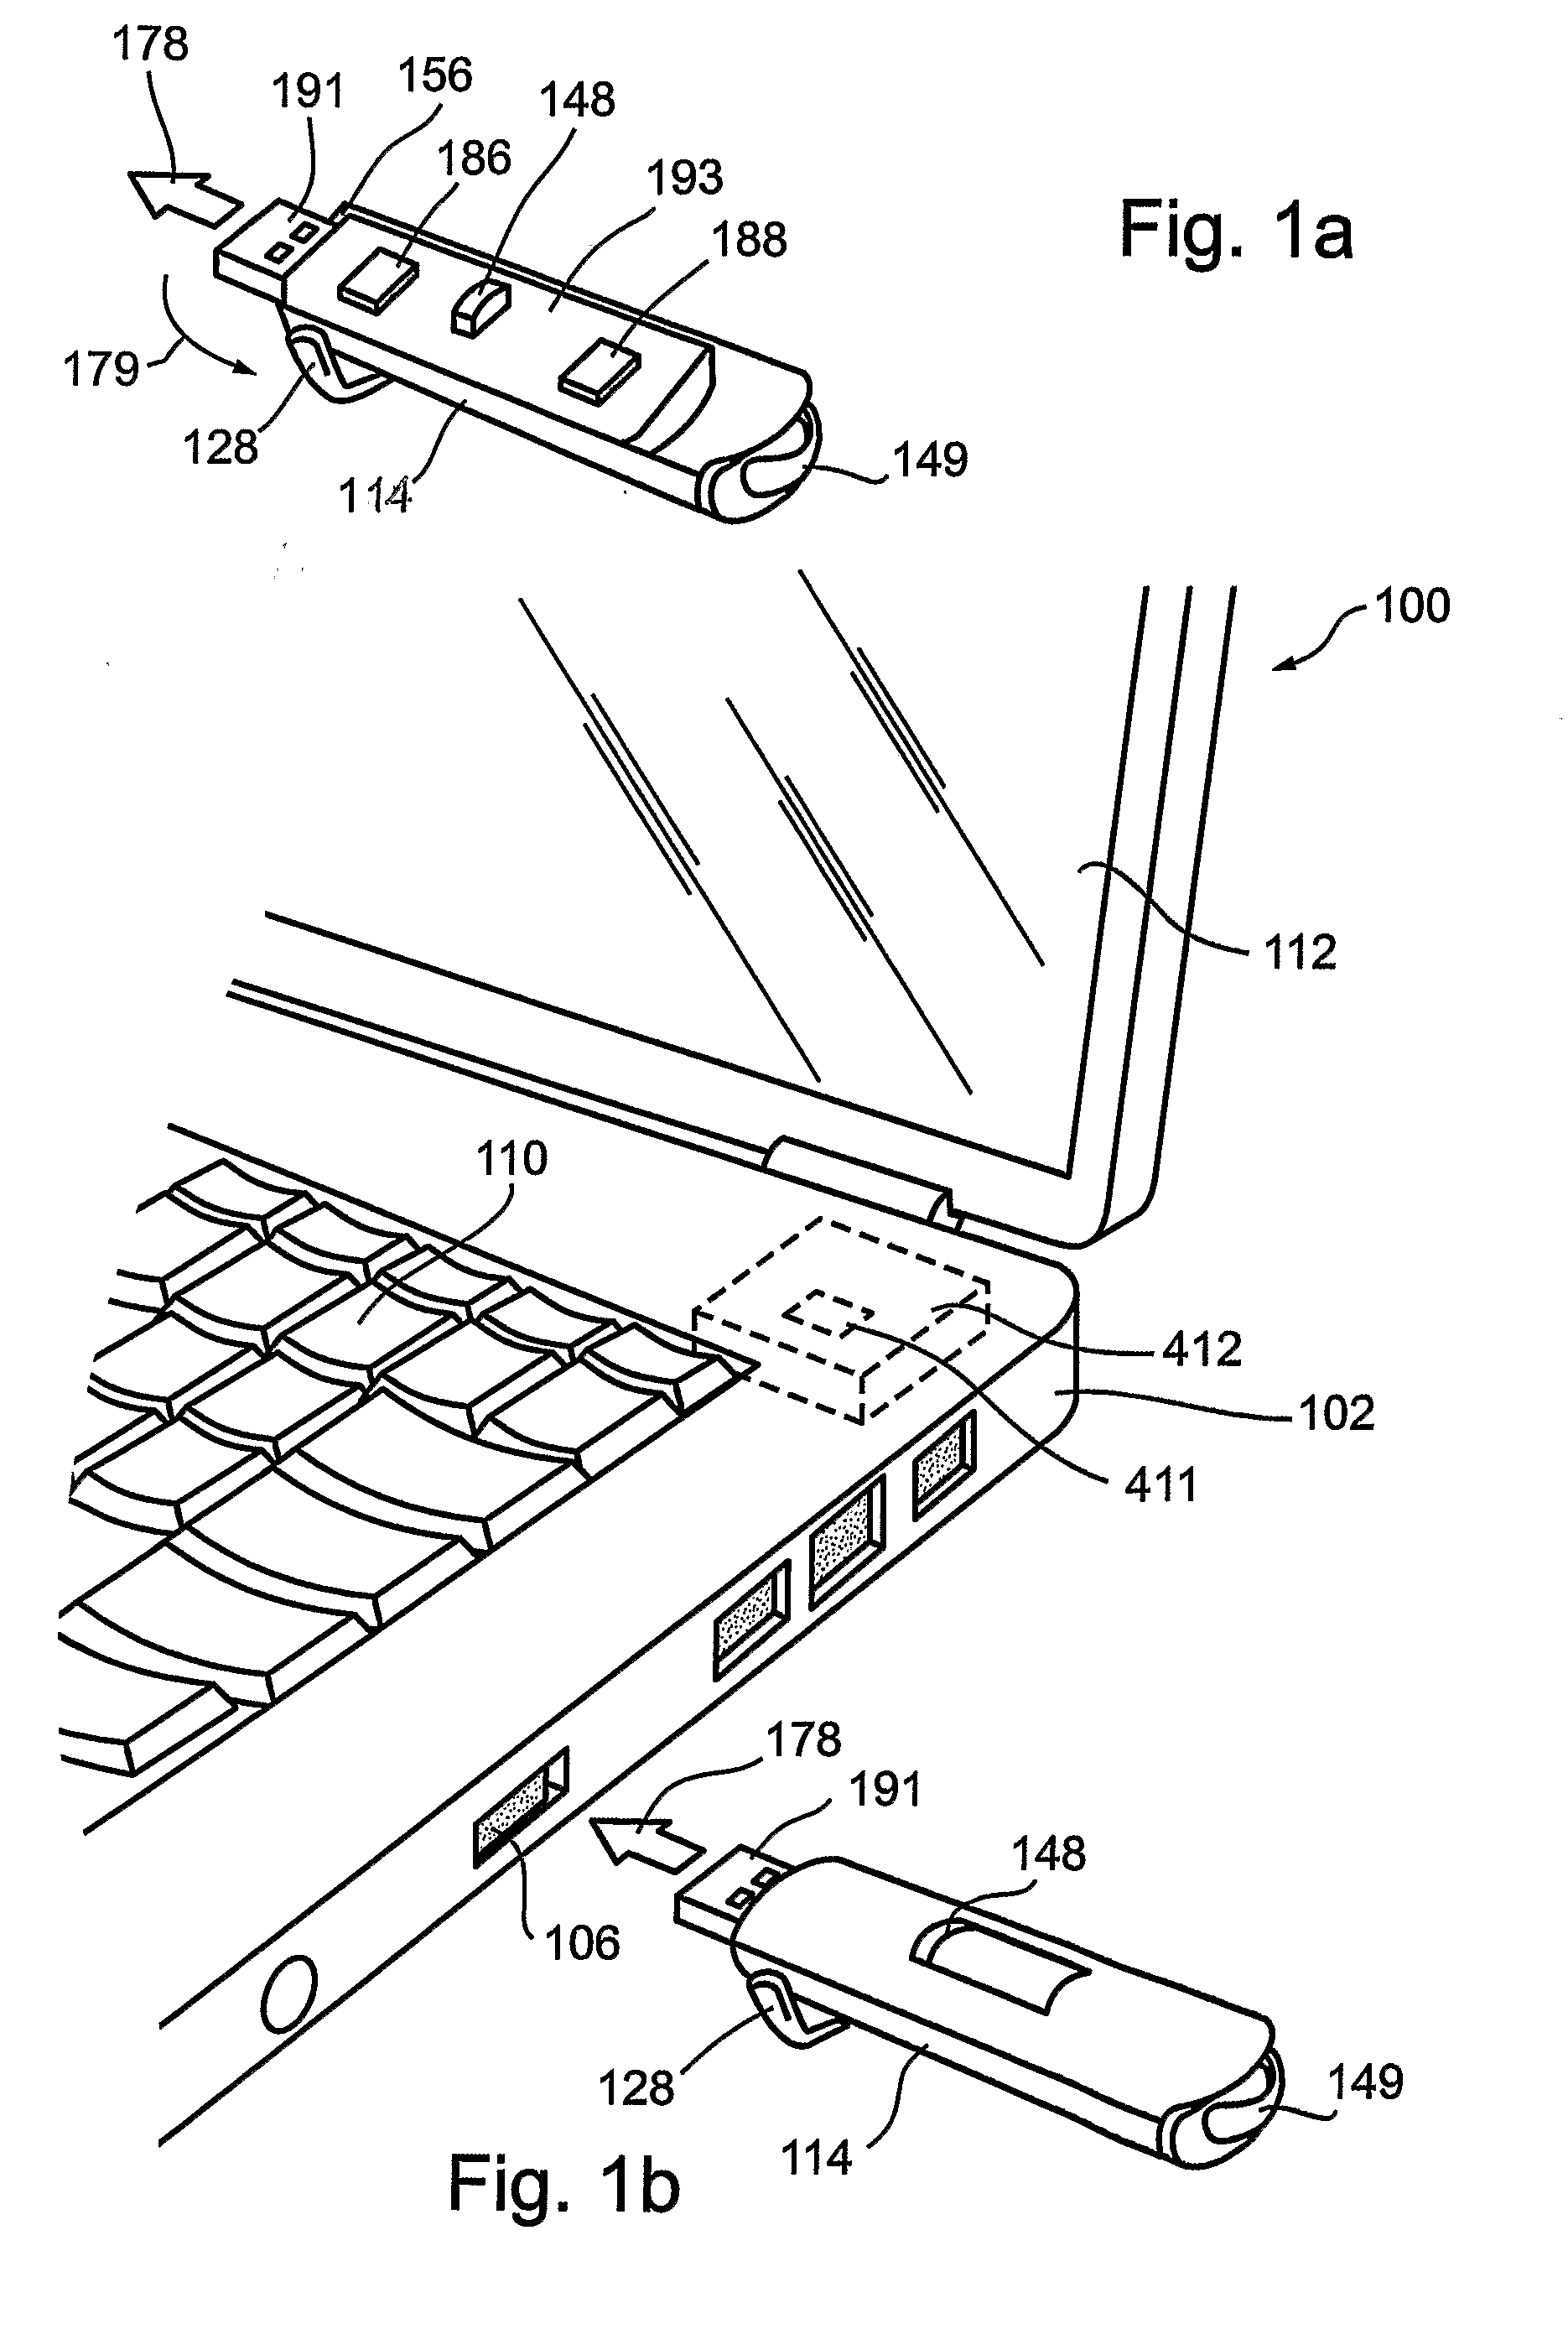 Computer Session Management Device and System